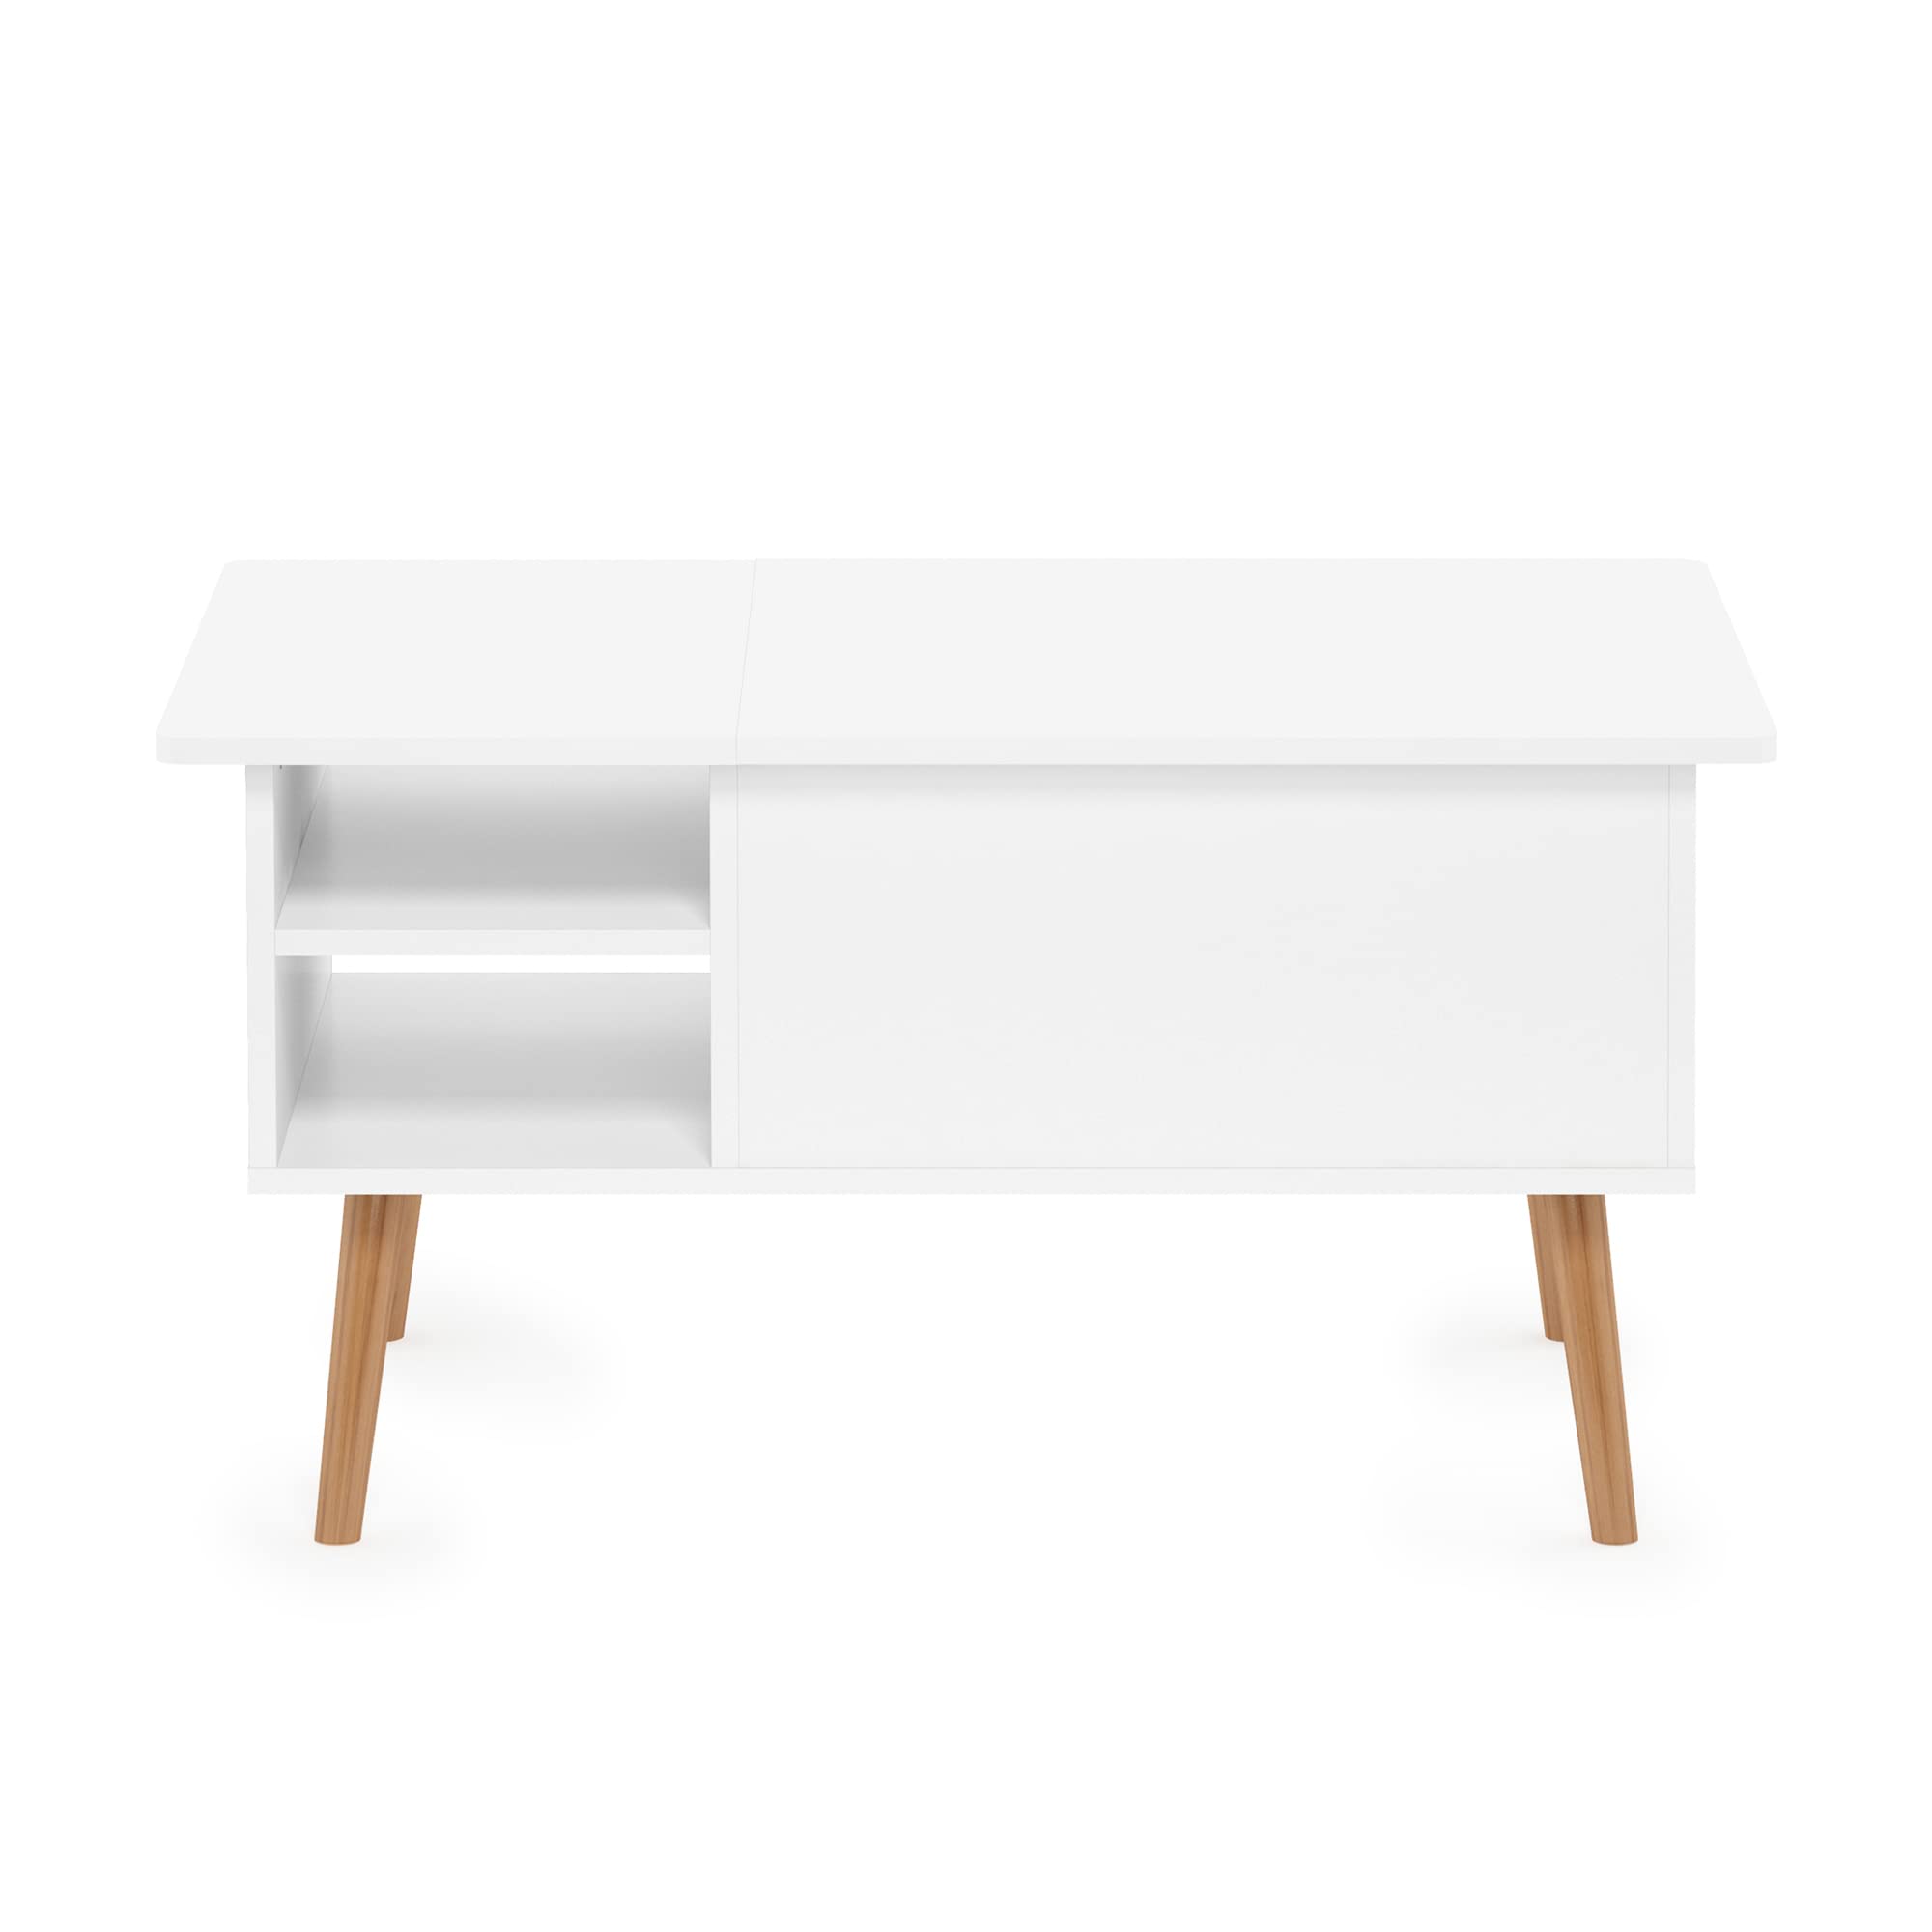 Furinno Jensen Living Room Wooden Leg Lift Top Coffee Table With Hidden Compartment and Side Open Storage Shelf, Solid White